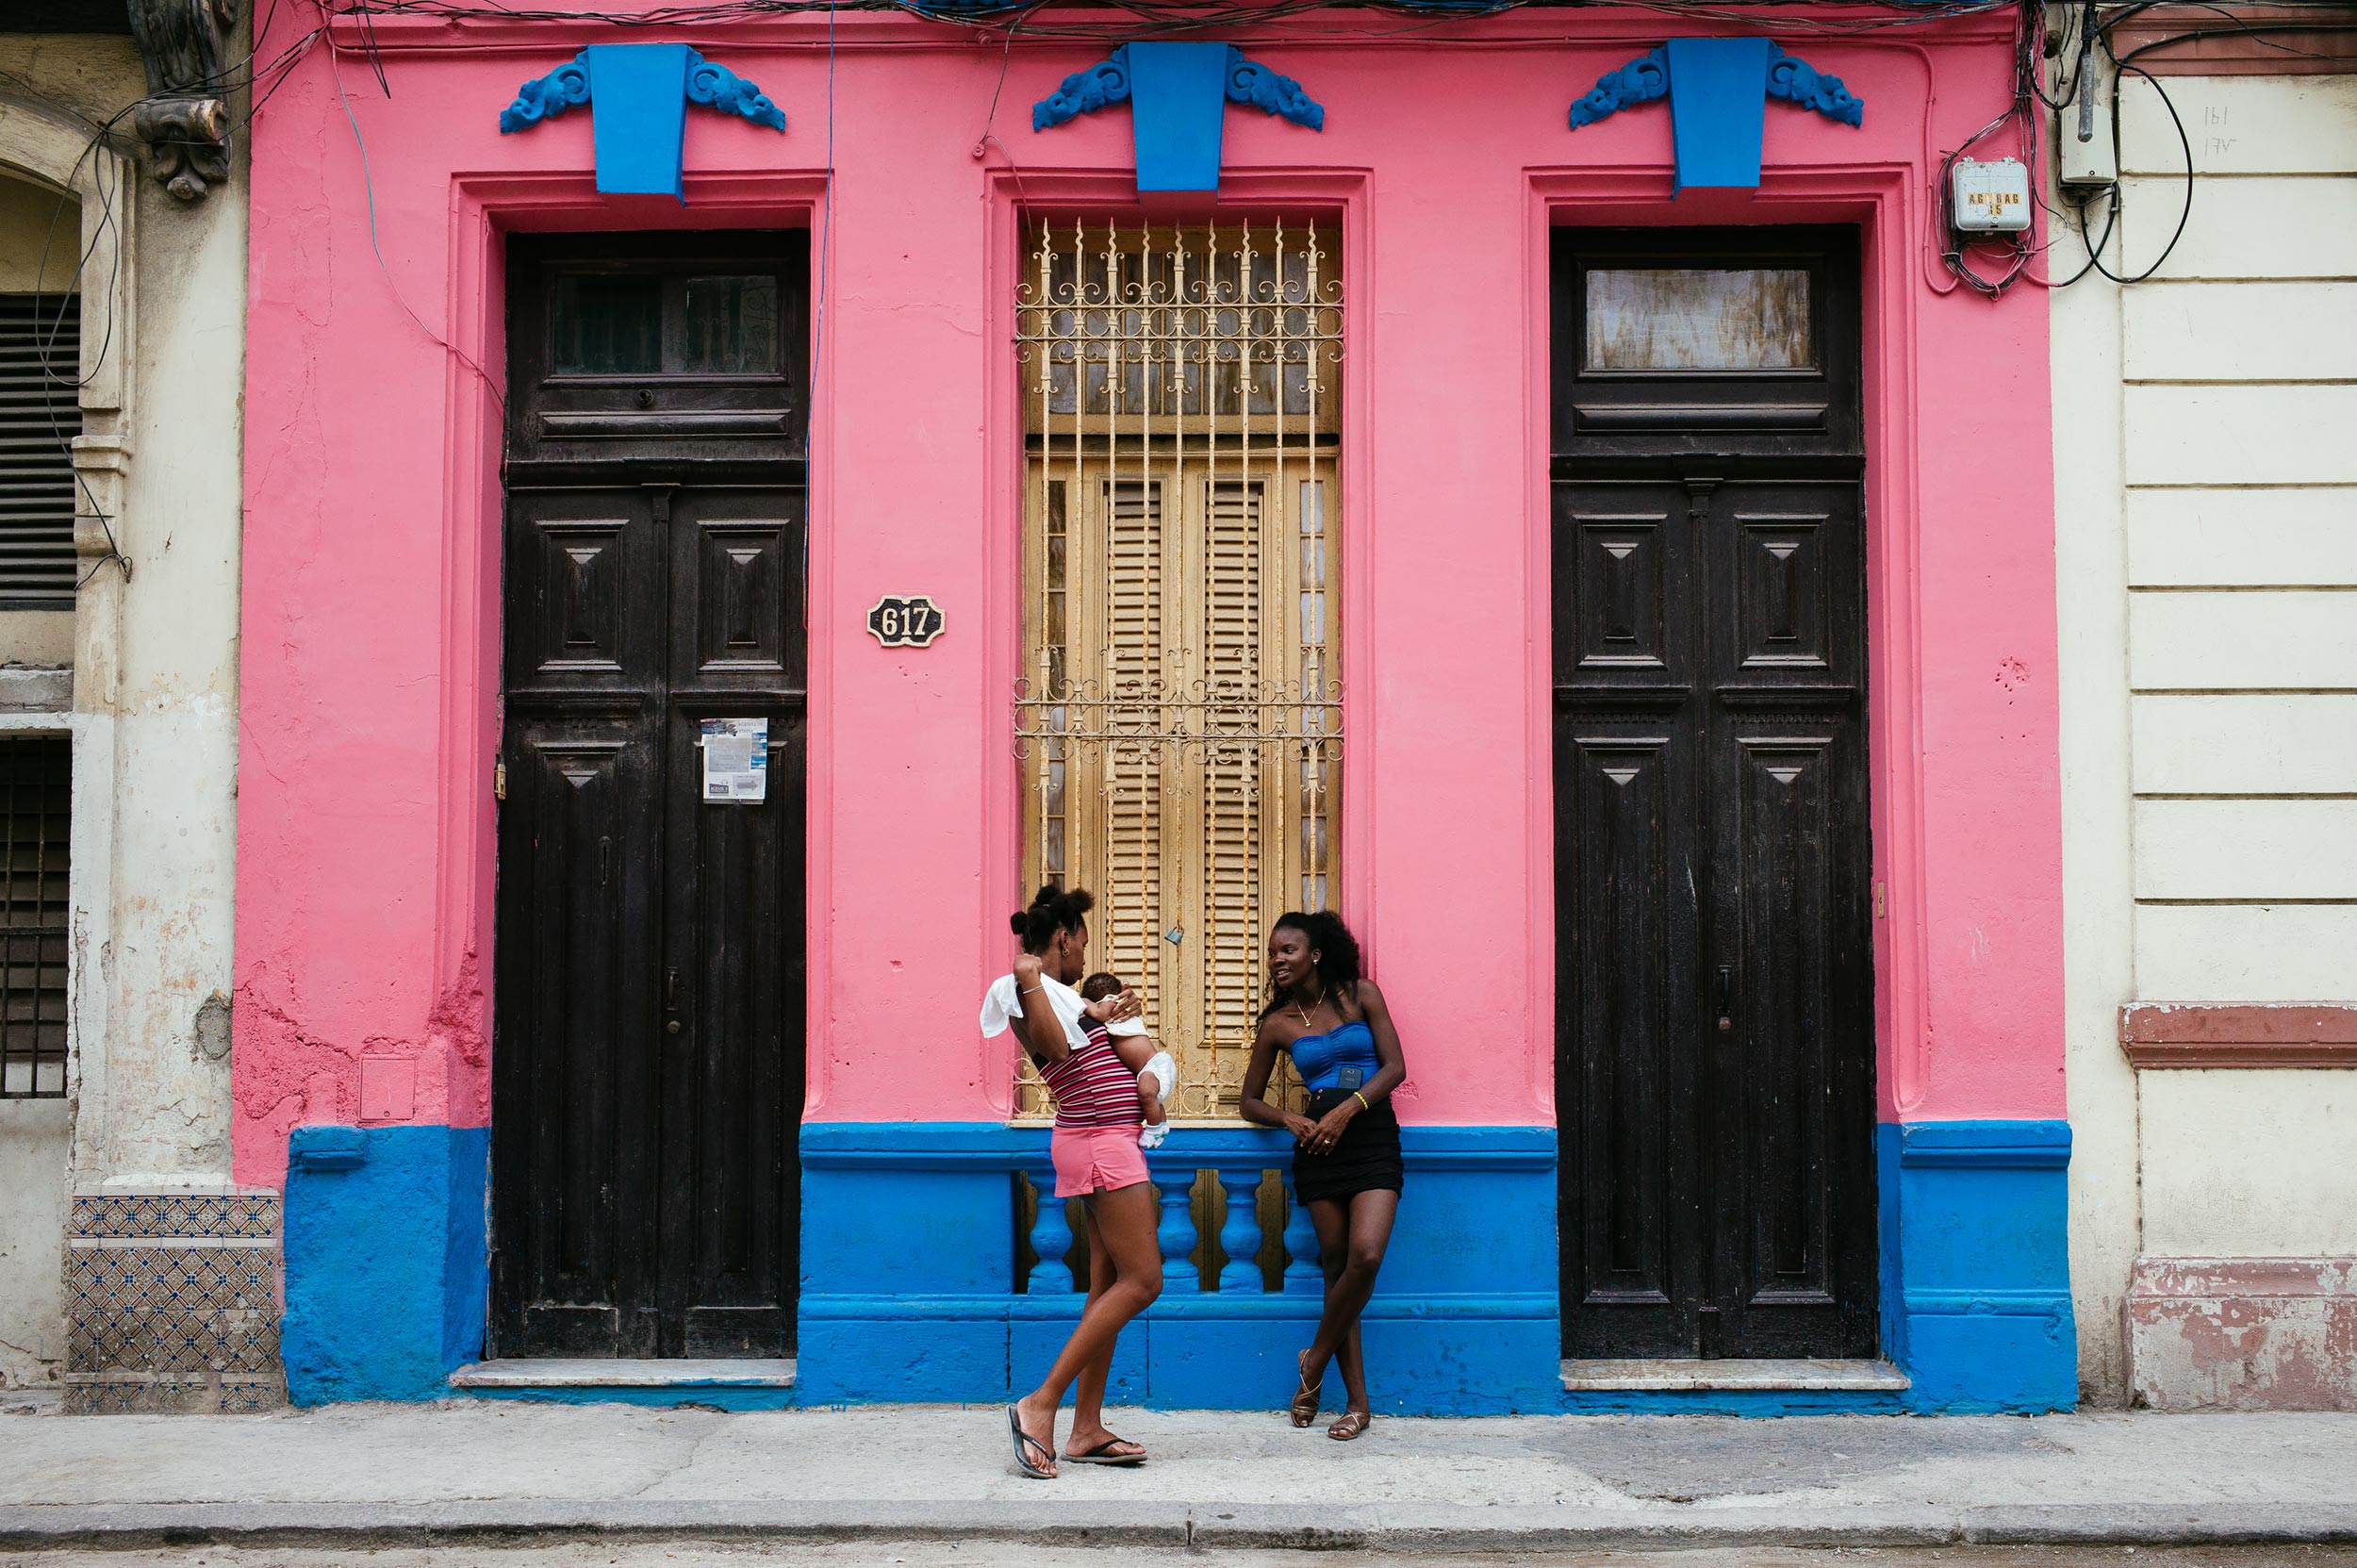 La-Habana-2016-two-ladies-standing-building-has-colors-of-their-clothes-street-photography-by-Alessandro-Avenali.jpg